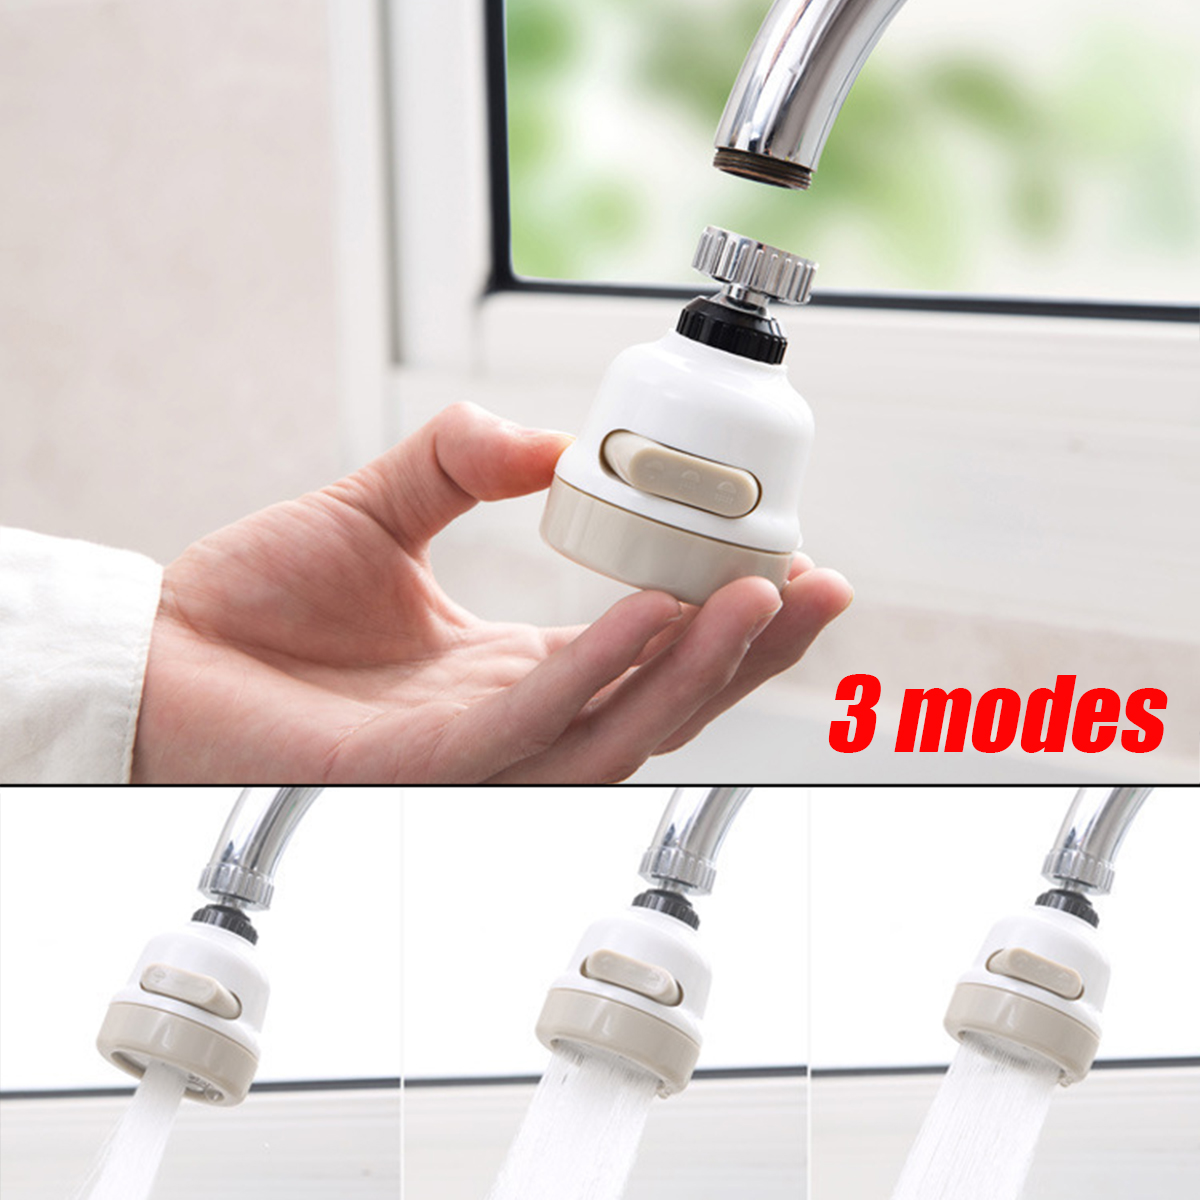 MSKJ Booster Shower Kitchen Home Water Filter Tap Head 360 Degree Rotating Faucet Nozzle